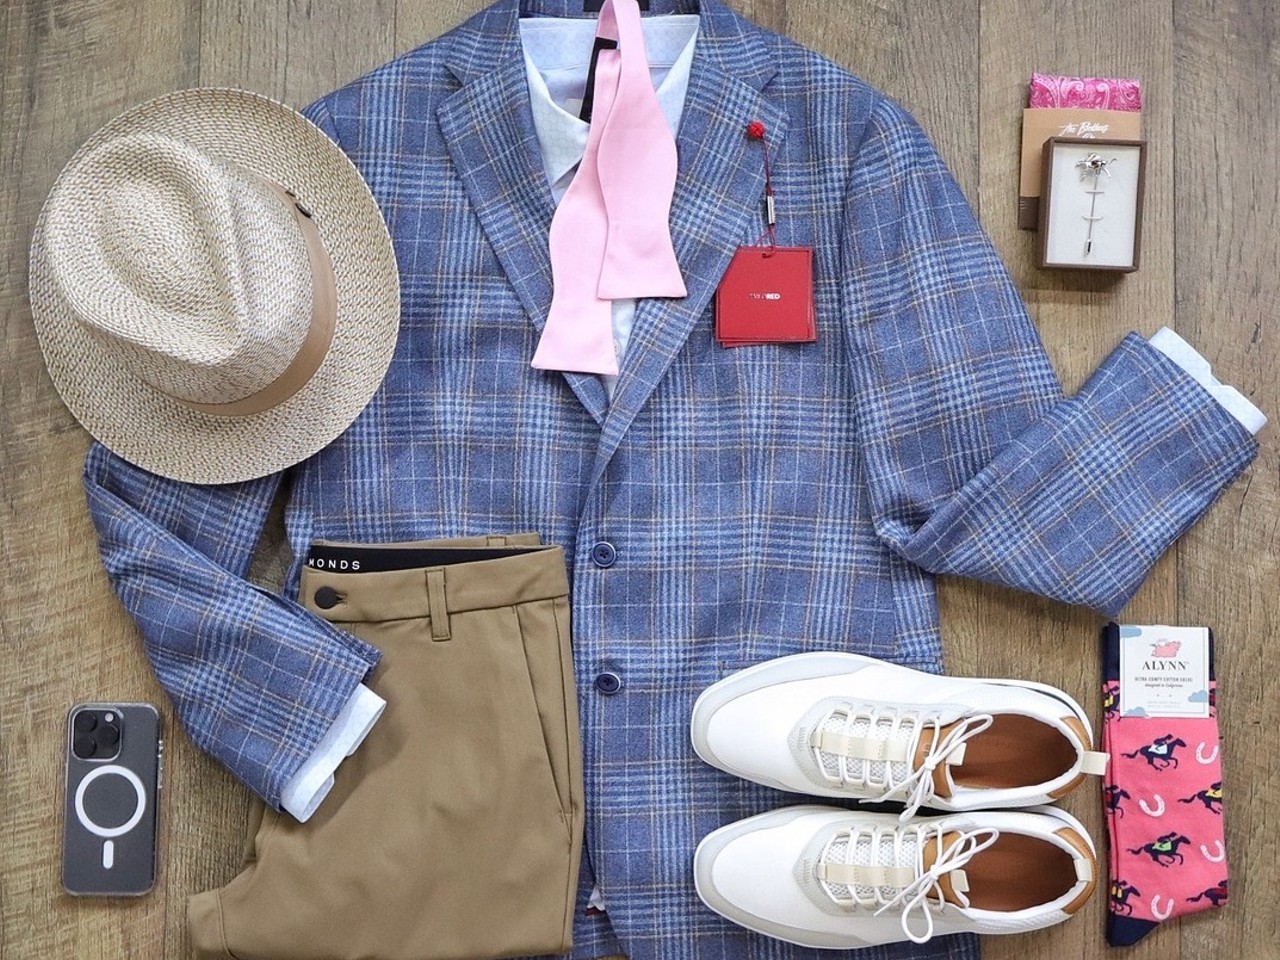 Him+Her BoutiqueListen here boys, don’t give excuses about your Derby looks when Him+Her exists. Get it polished.